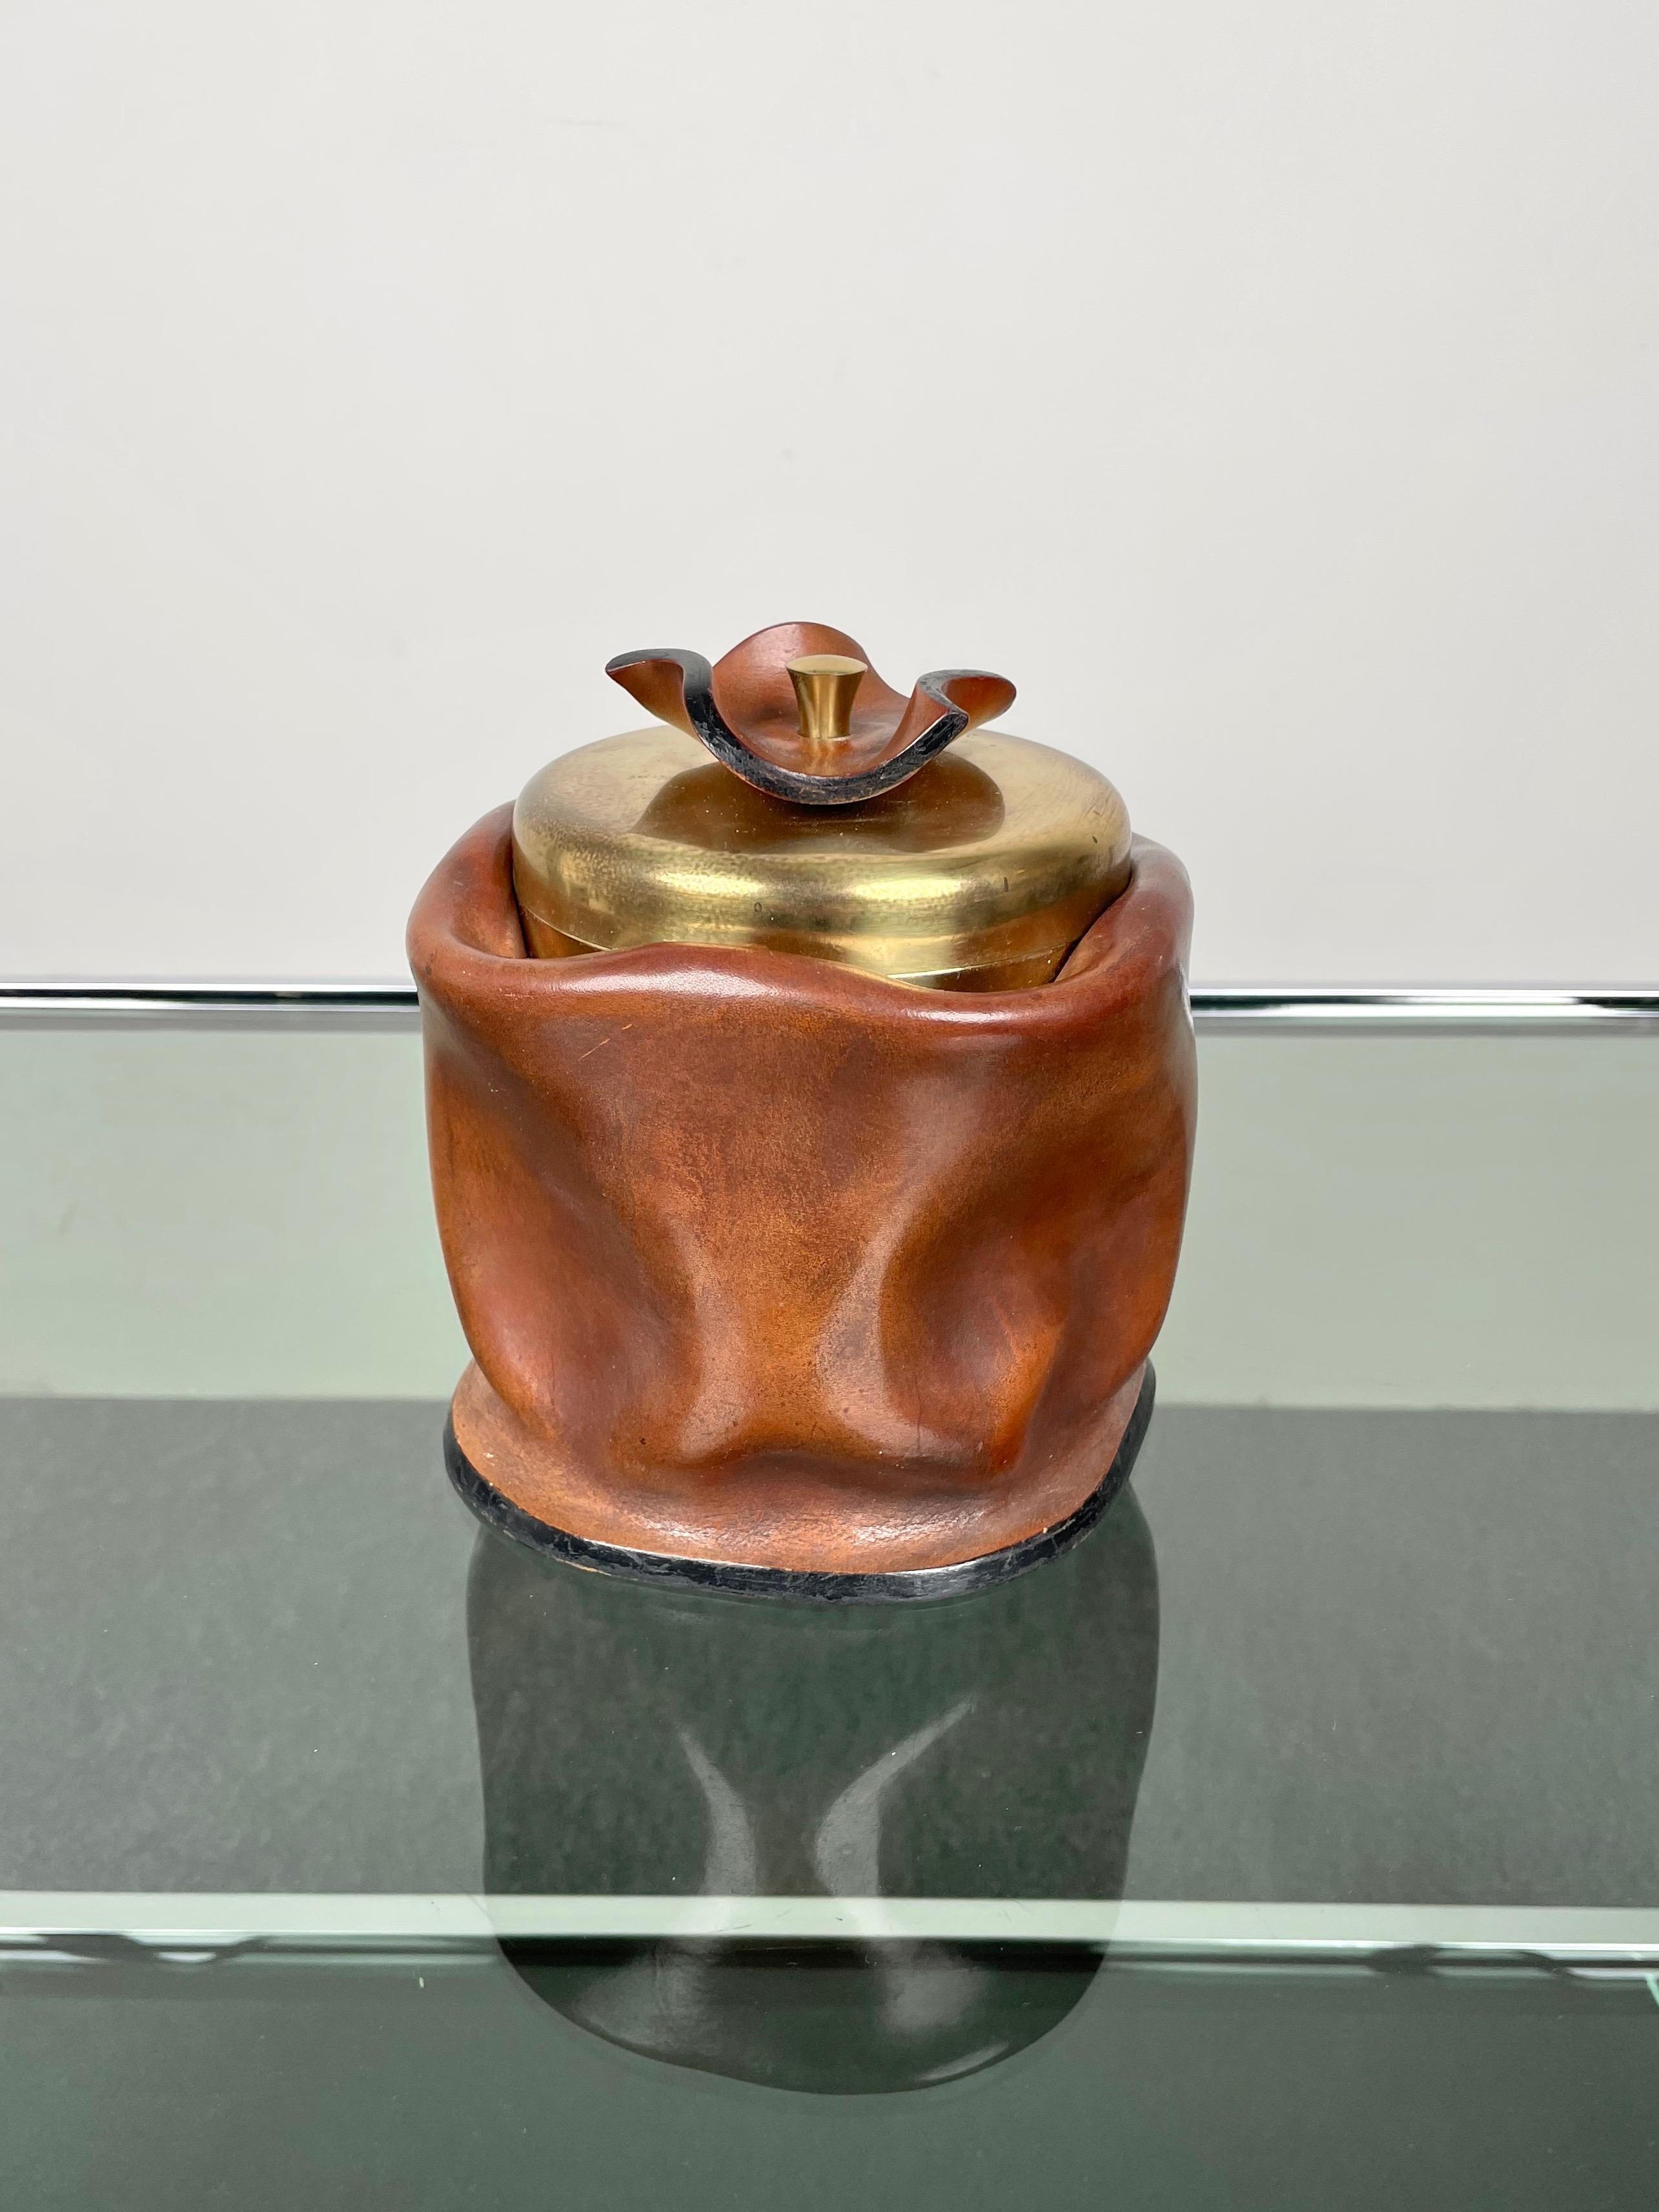 1970s Italian ice bucket in leather and brass. On the bottom, there are the engraved signature of the manufacturer and the text 